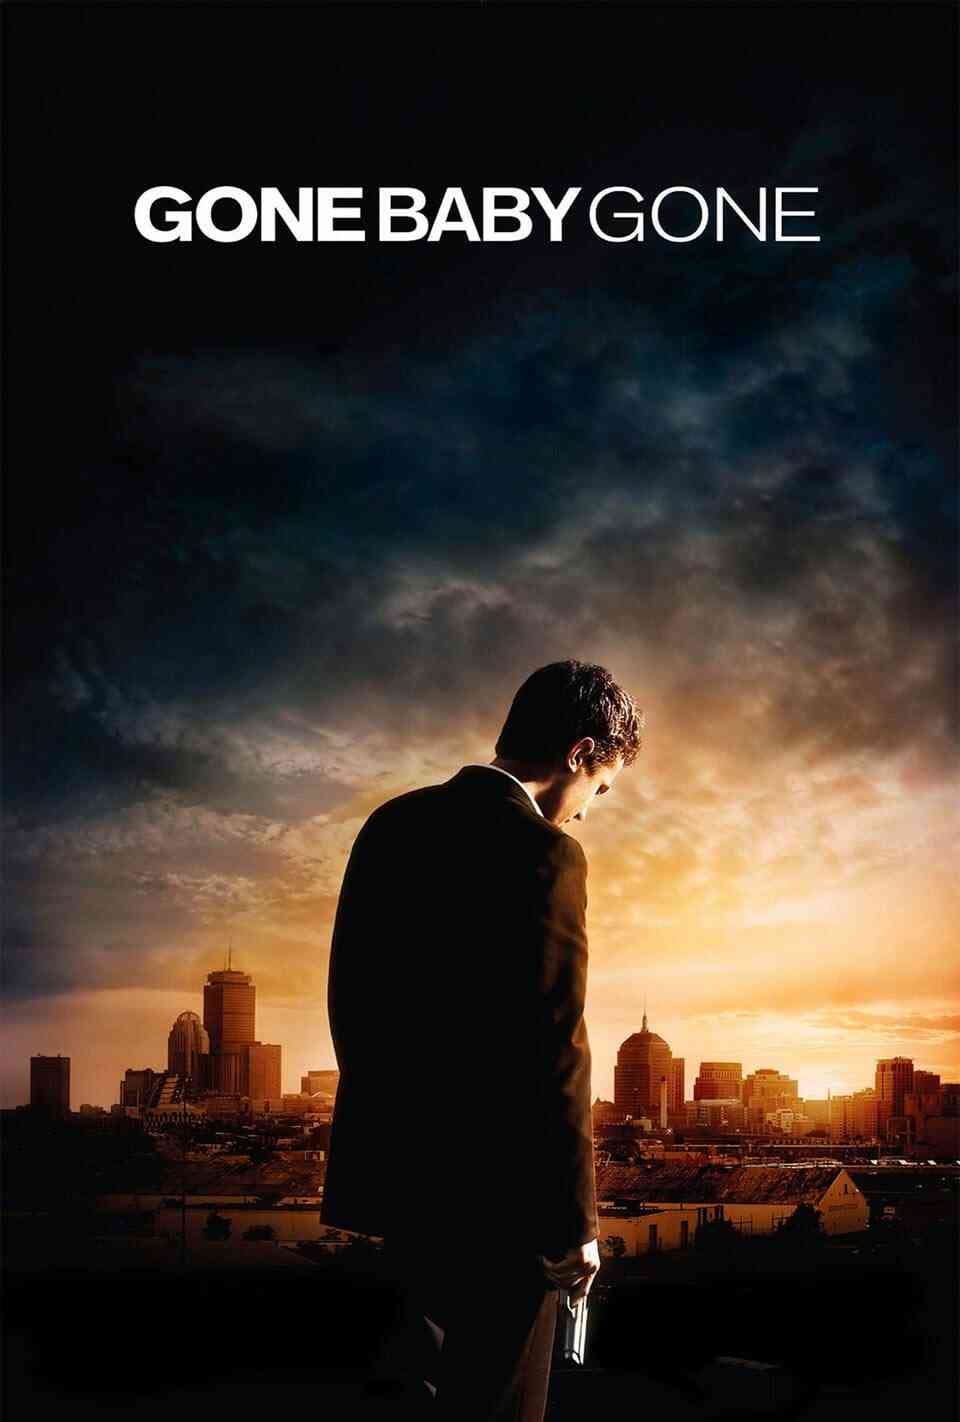 Read Gone Baby Gone screenplay (poster)